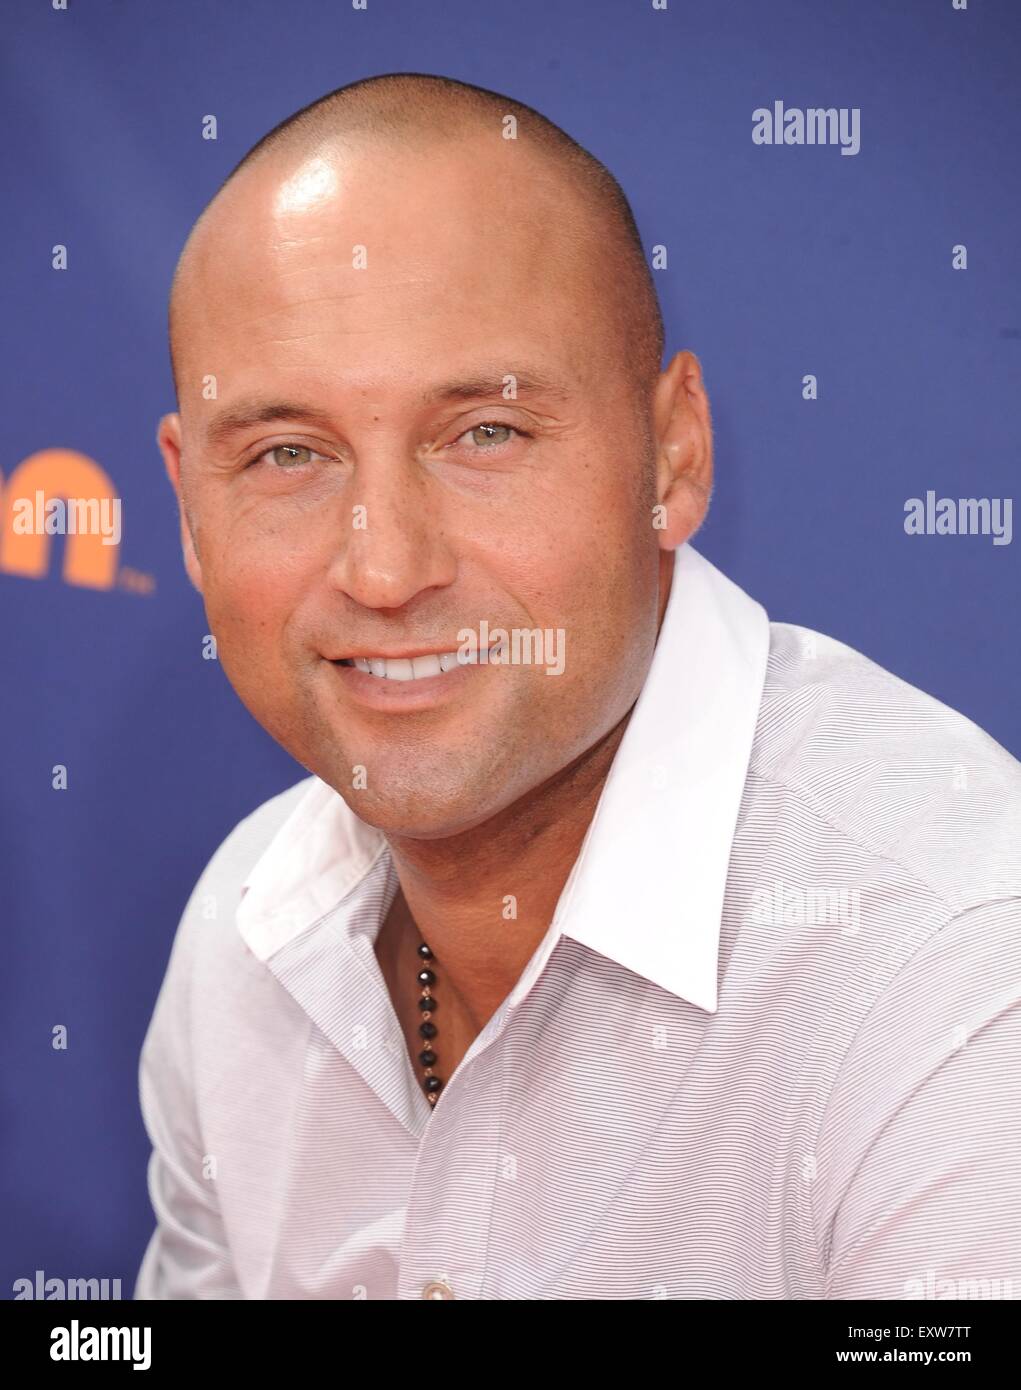 Los Angeles, California, USA. 16th July, 2015. Derek Jeter at arrivals for Nickelodeon Kids' Choice Sports Awards, Pauley Pavilion July 16, 2015. Credit:  Dee Cercone/Everett Collection/Alamy Live News Stock Photo